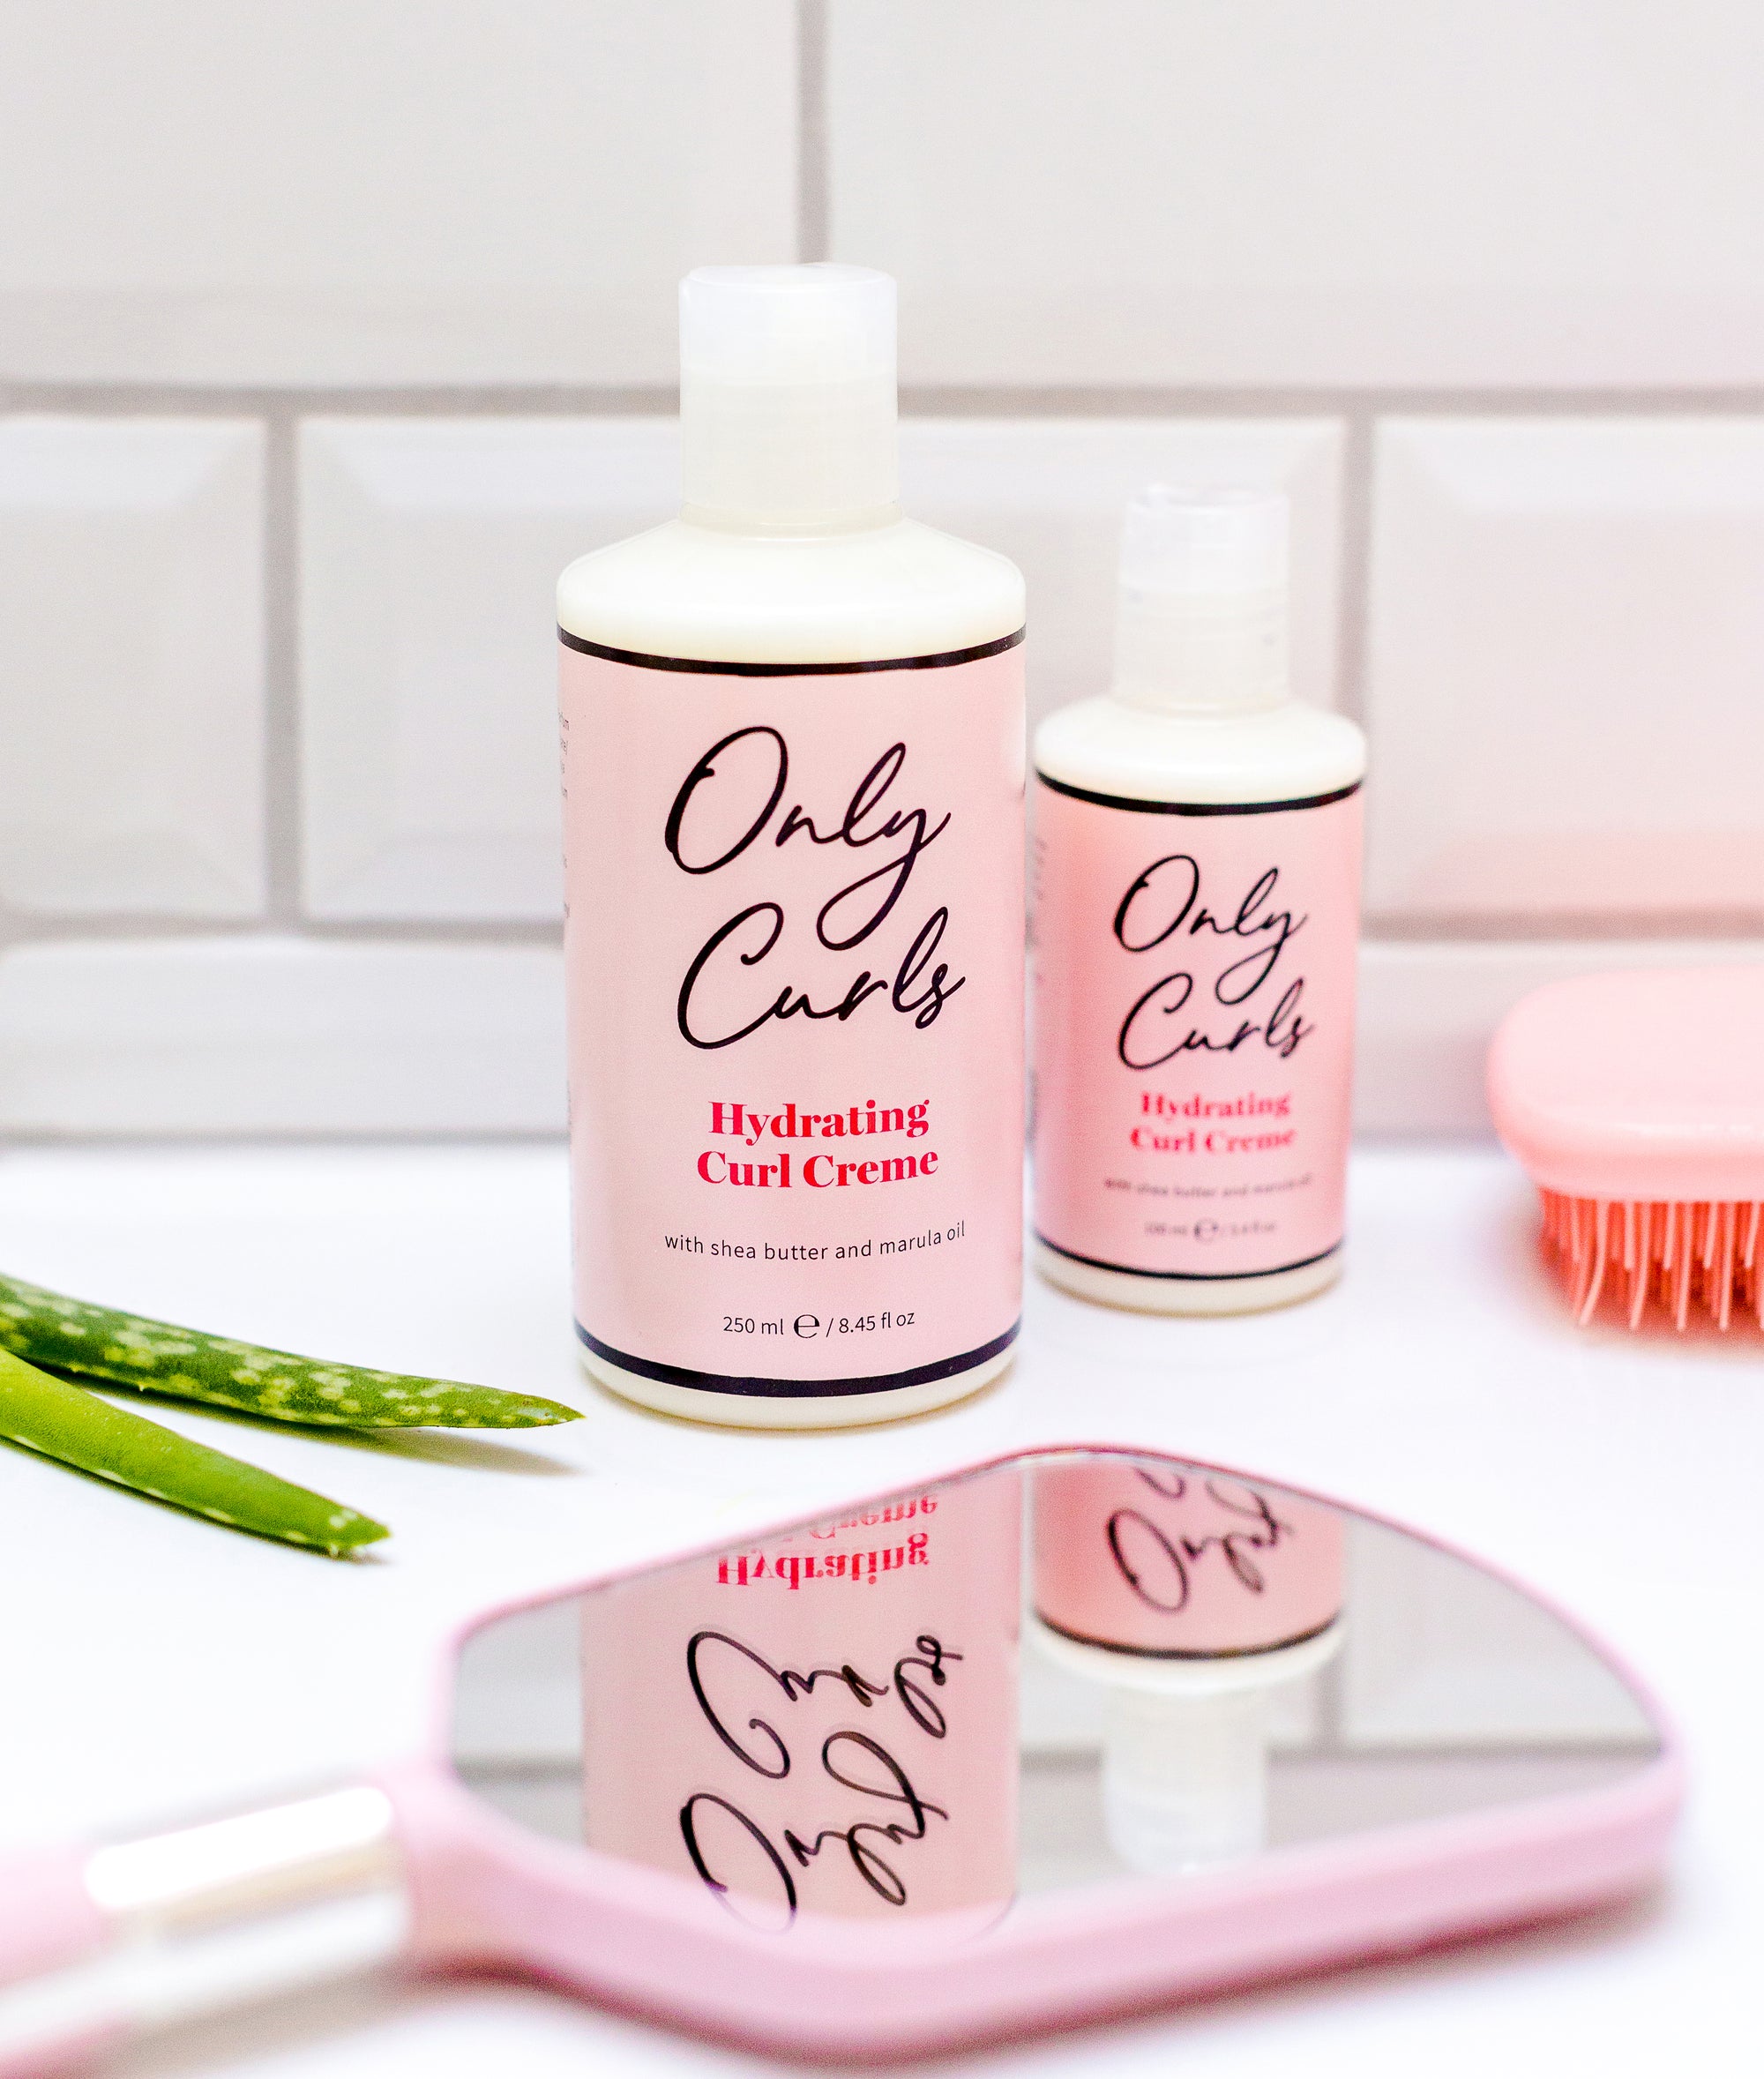 Only Curls Hydrating Curl Creme with mirror